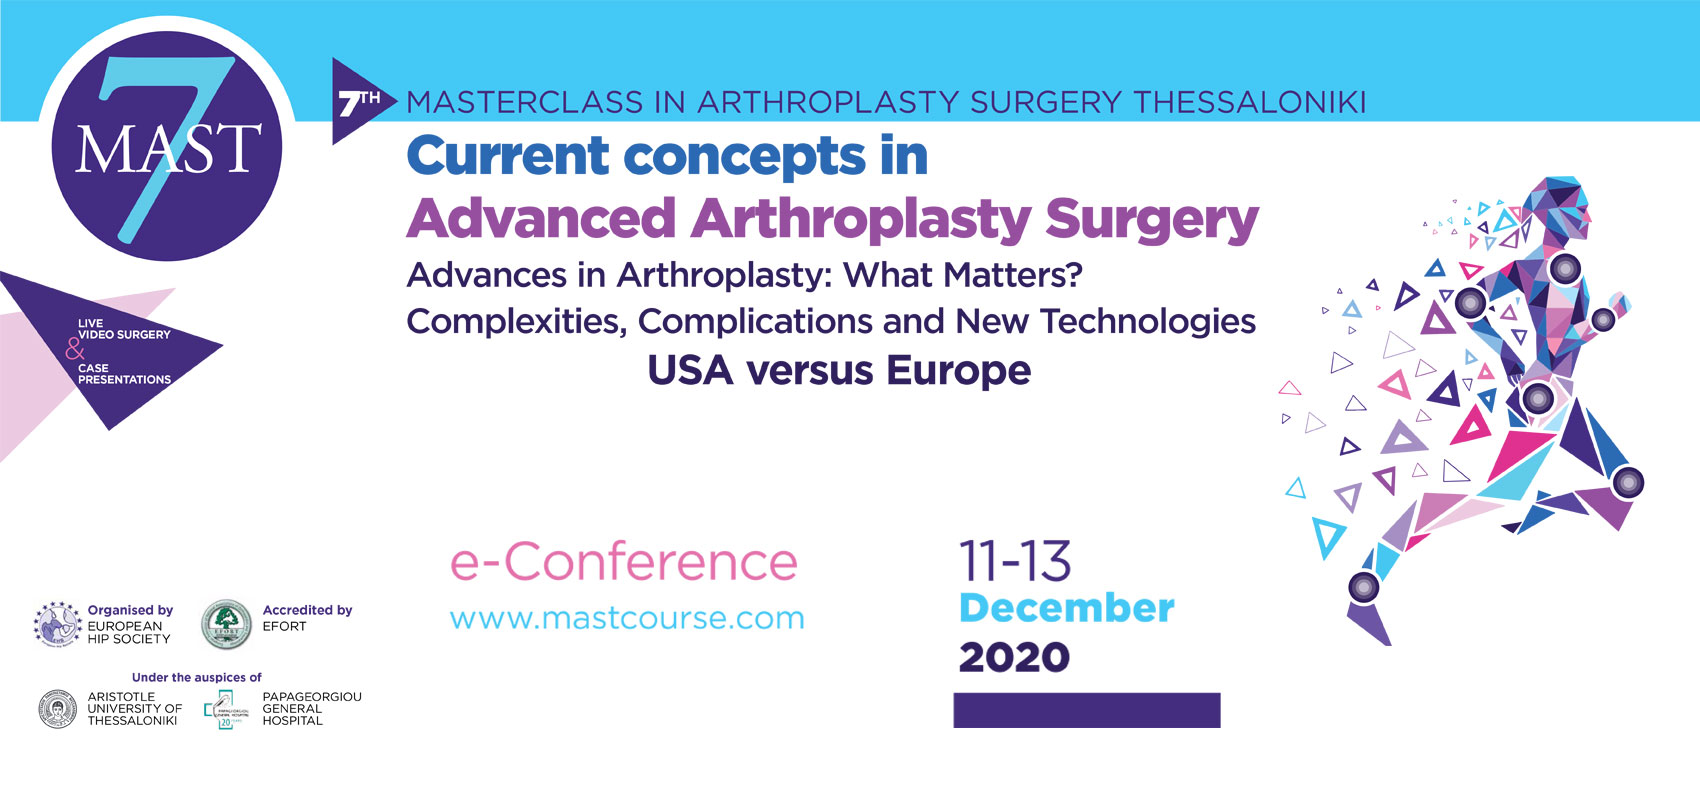 7th Masterclass in Arthroplasty Surgery Thessaloniki - Current Concepts in Advanced Arthroplasty Surgery